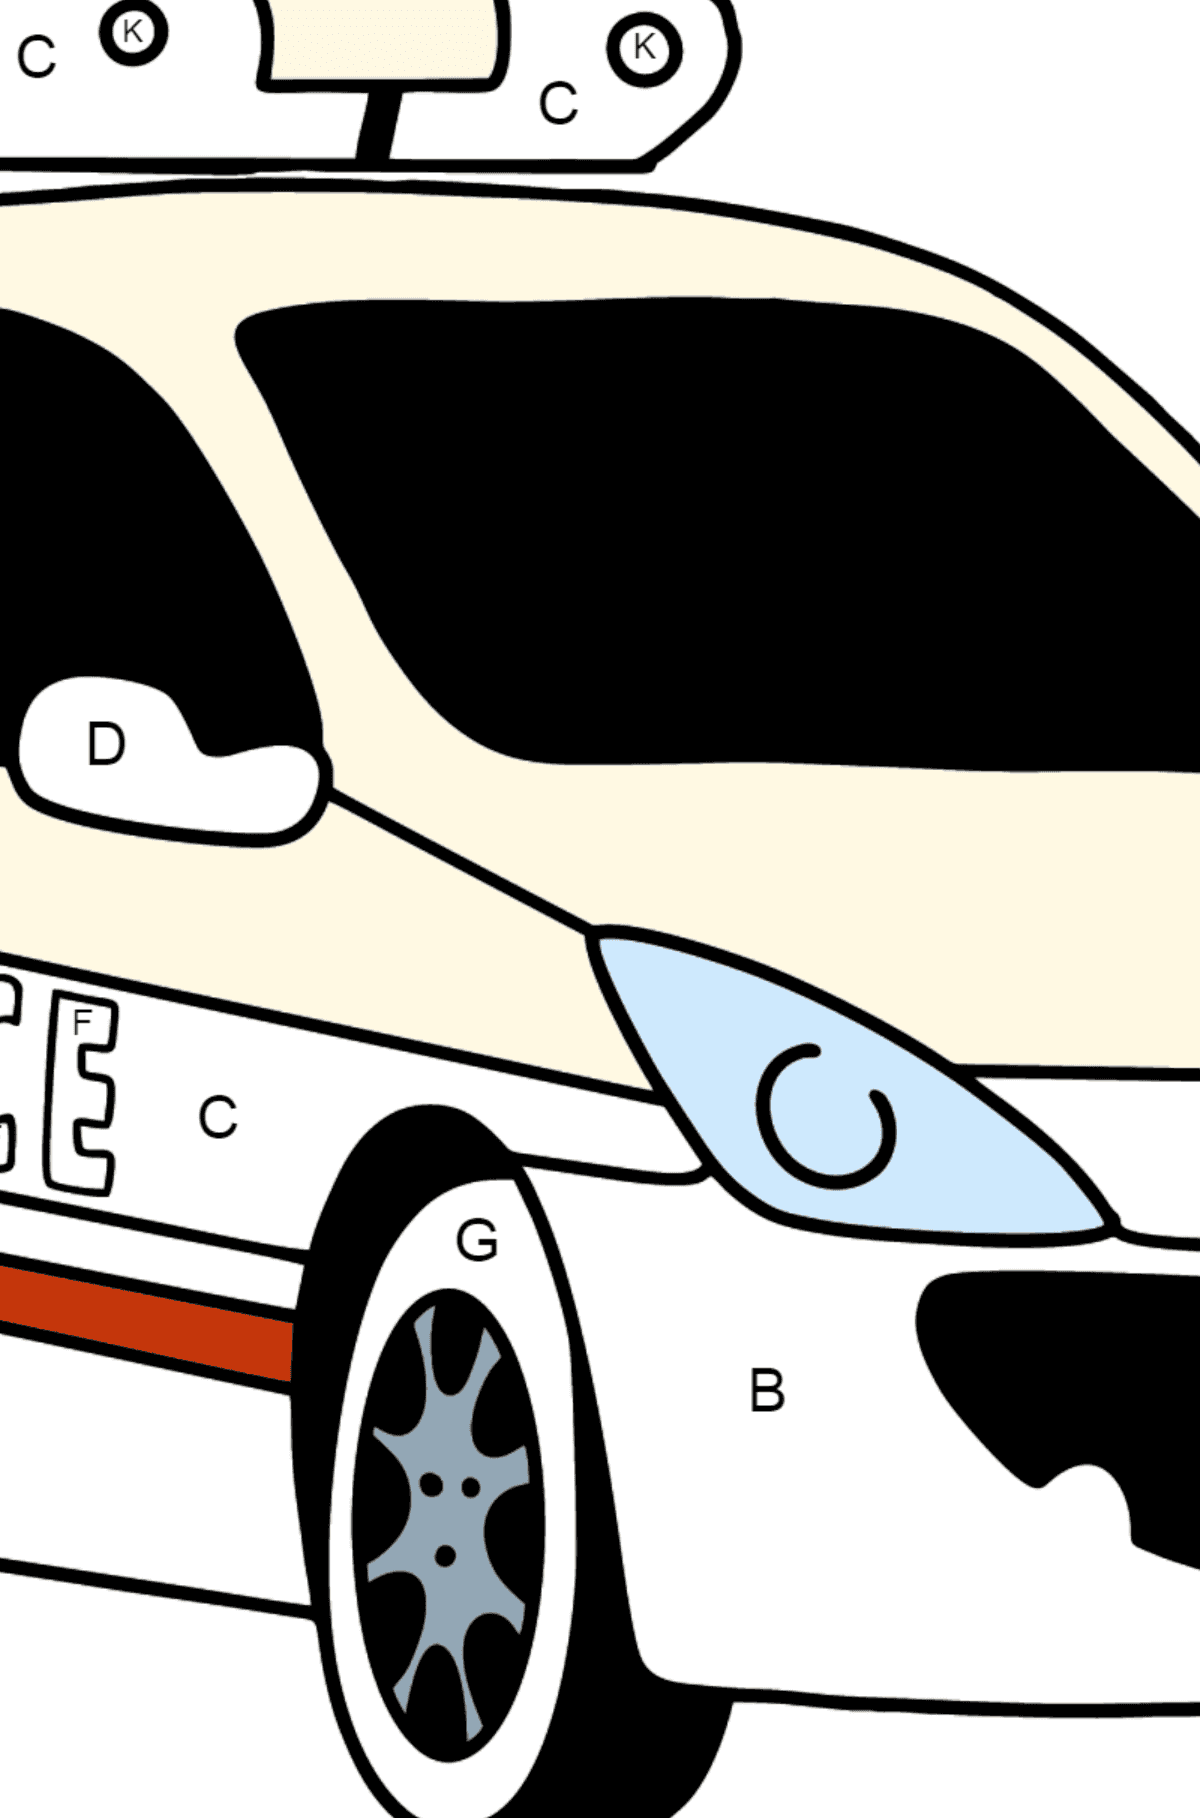 Police Car in France coloring page - Coloring by Letters for Kids